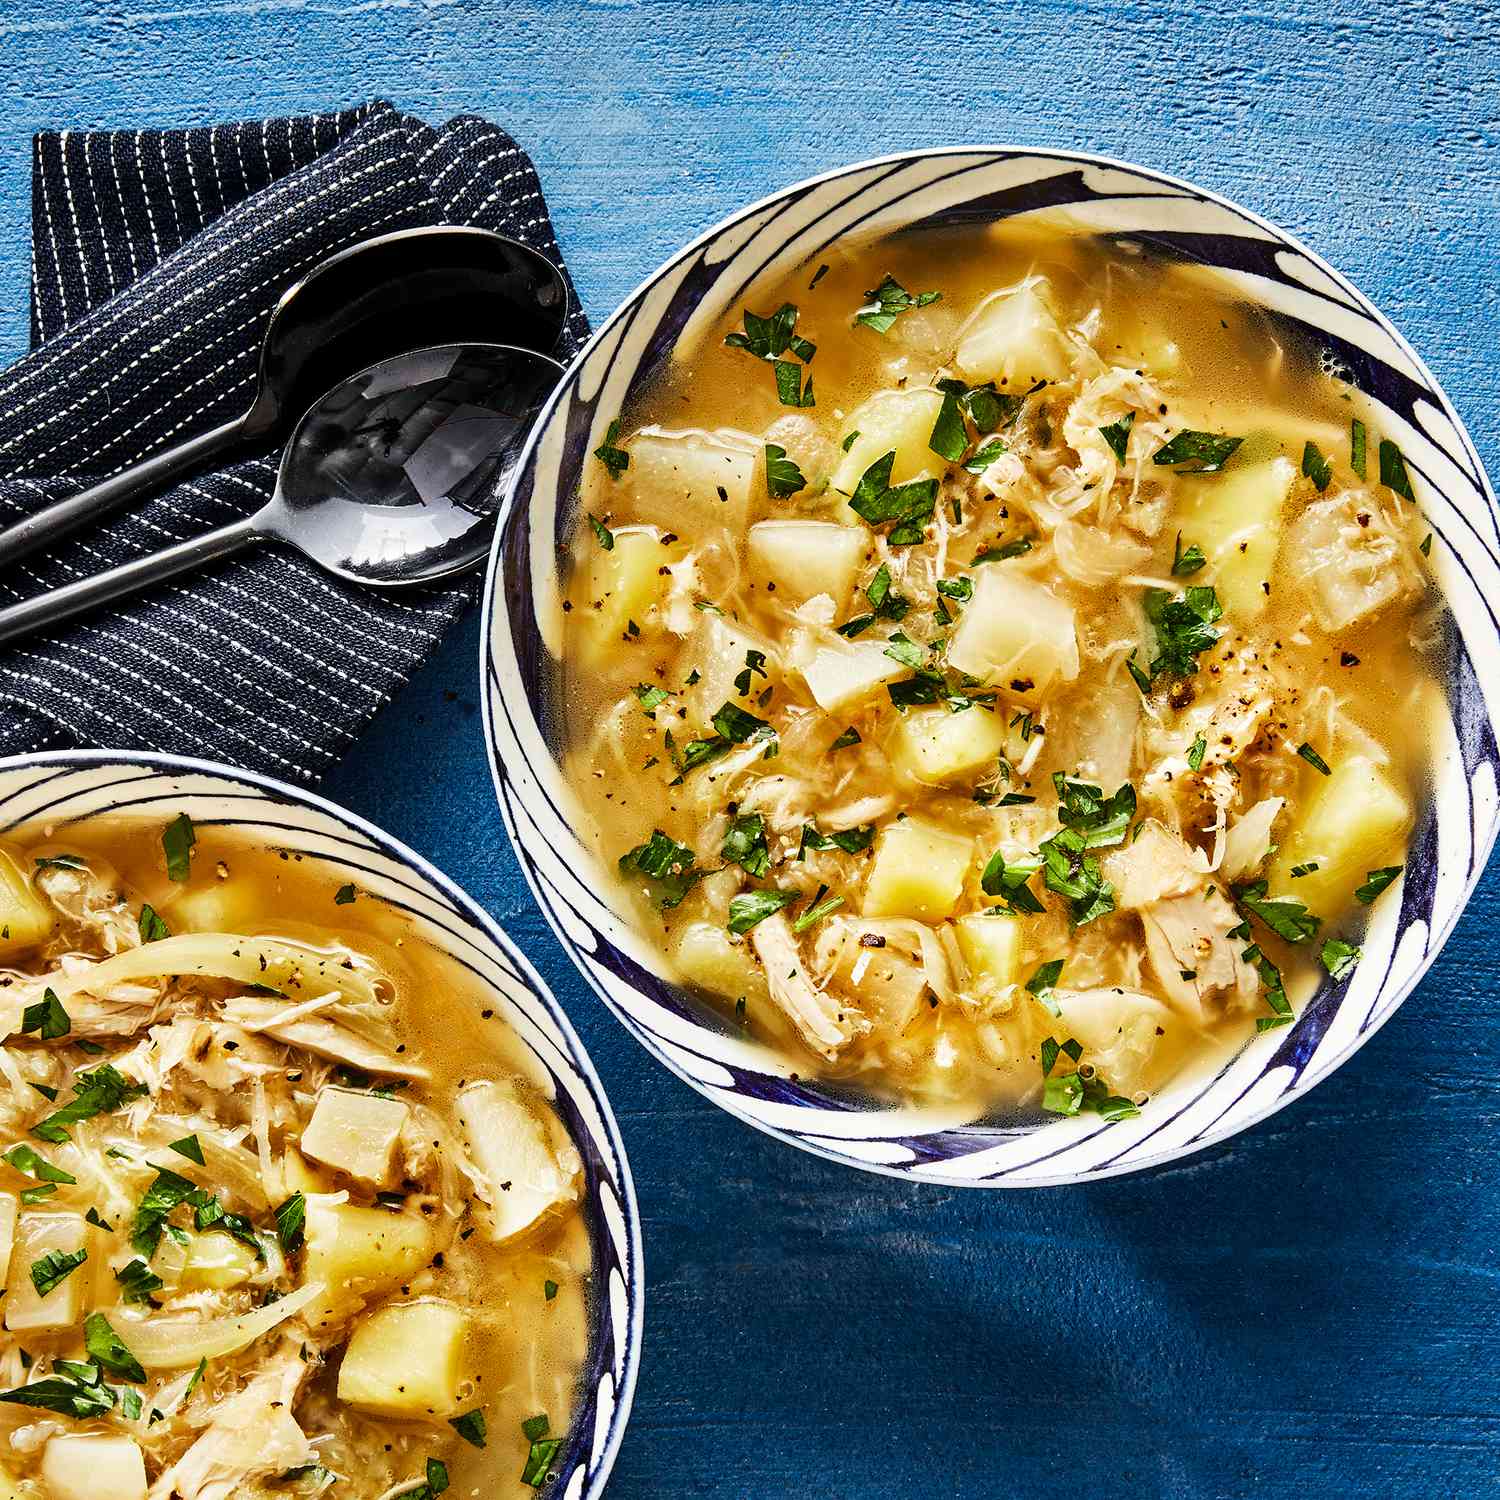 Chicken Soup With Cabbage: Origins, Recipes, and Health Benefits